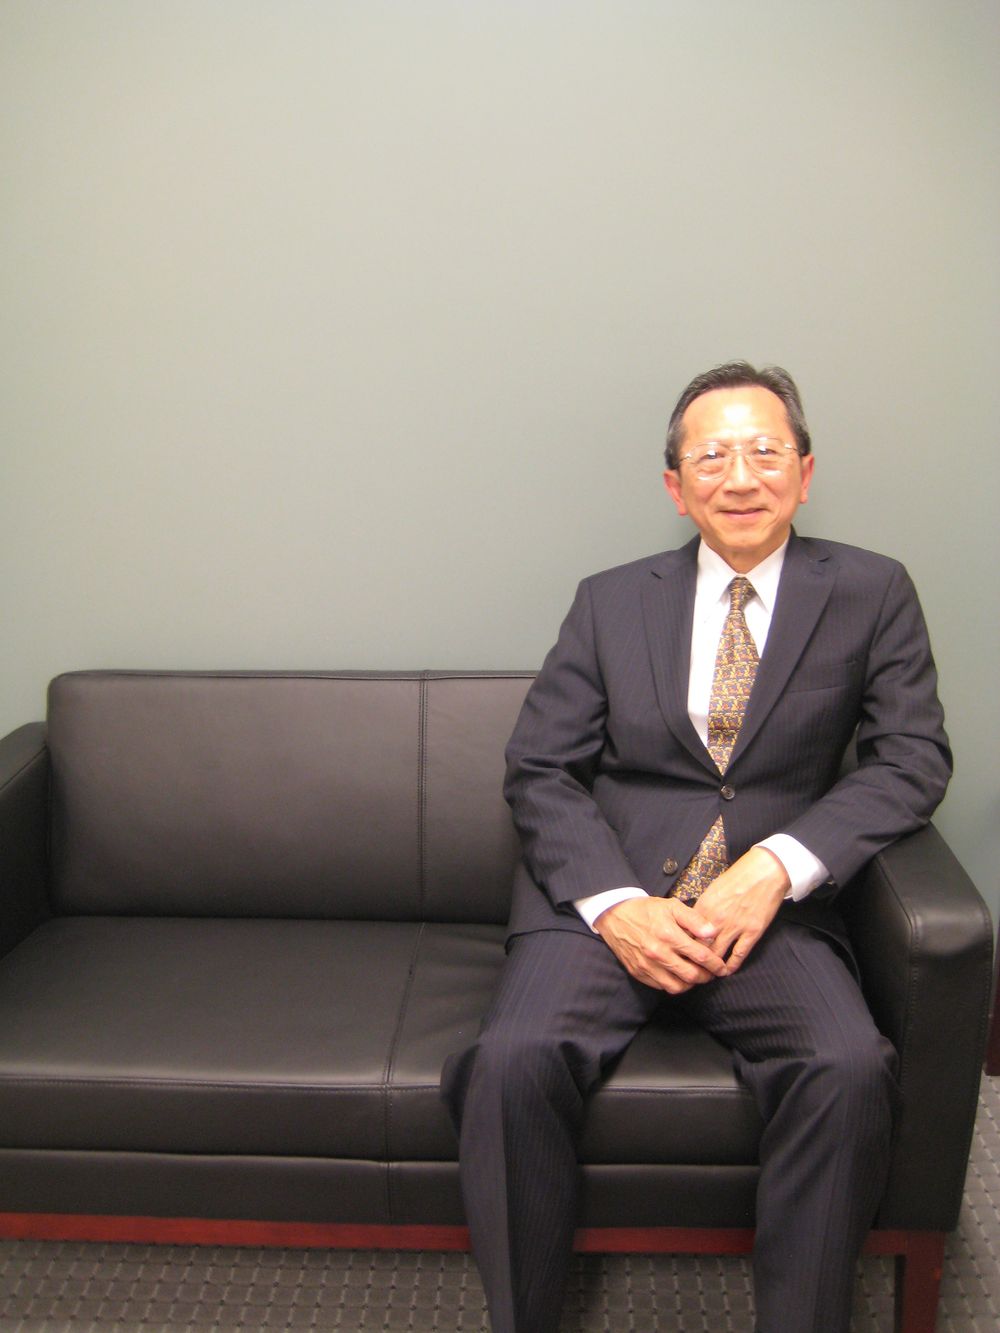 Dennis Lam, chairman, president and CEO